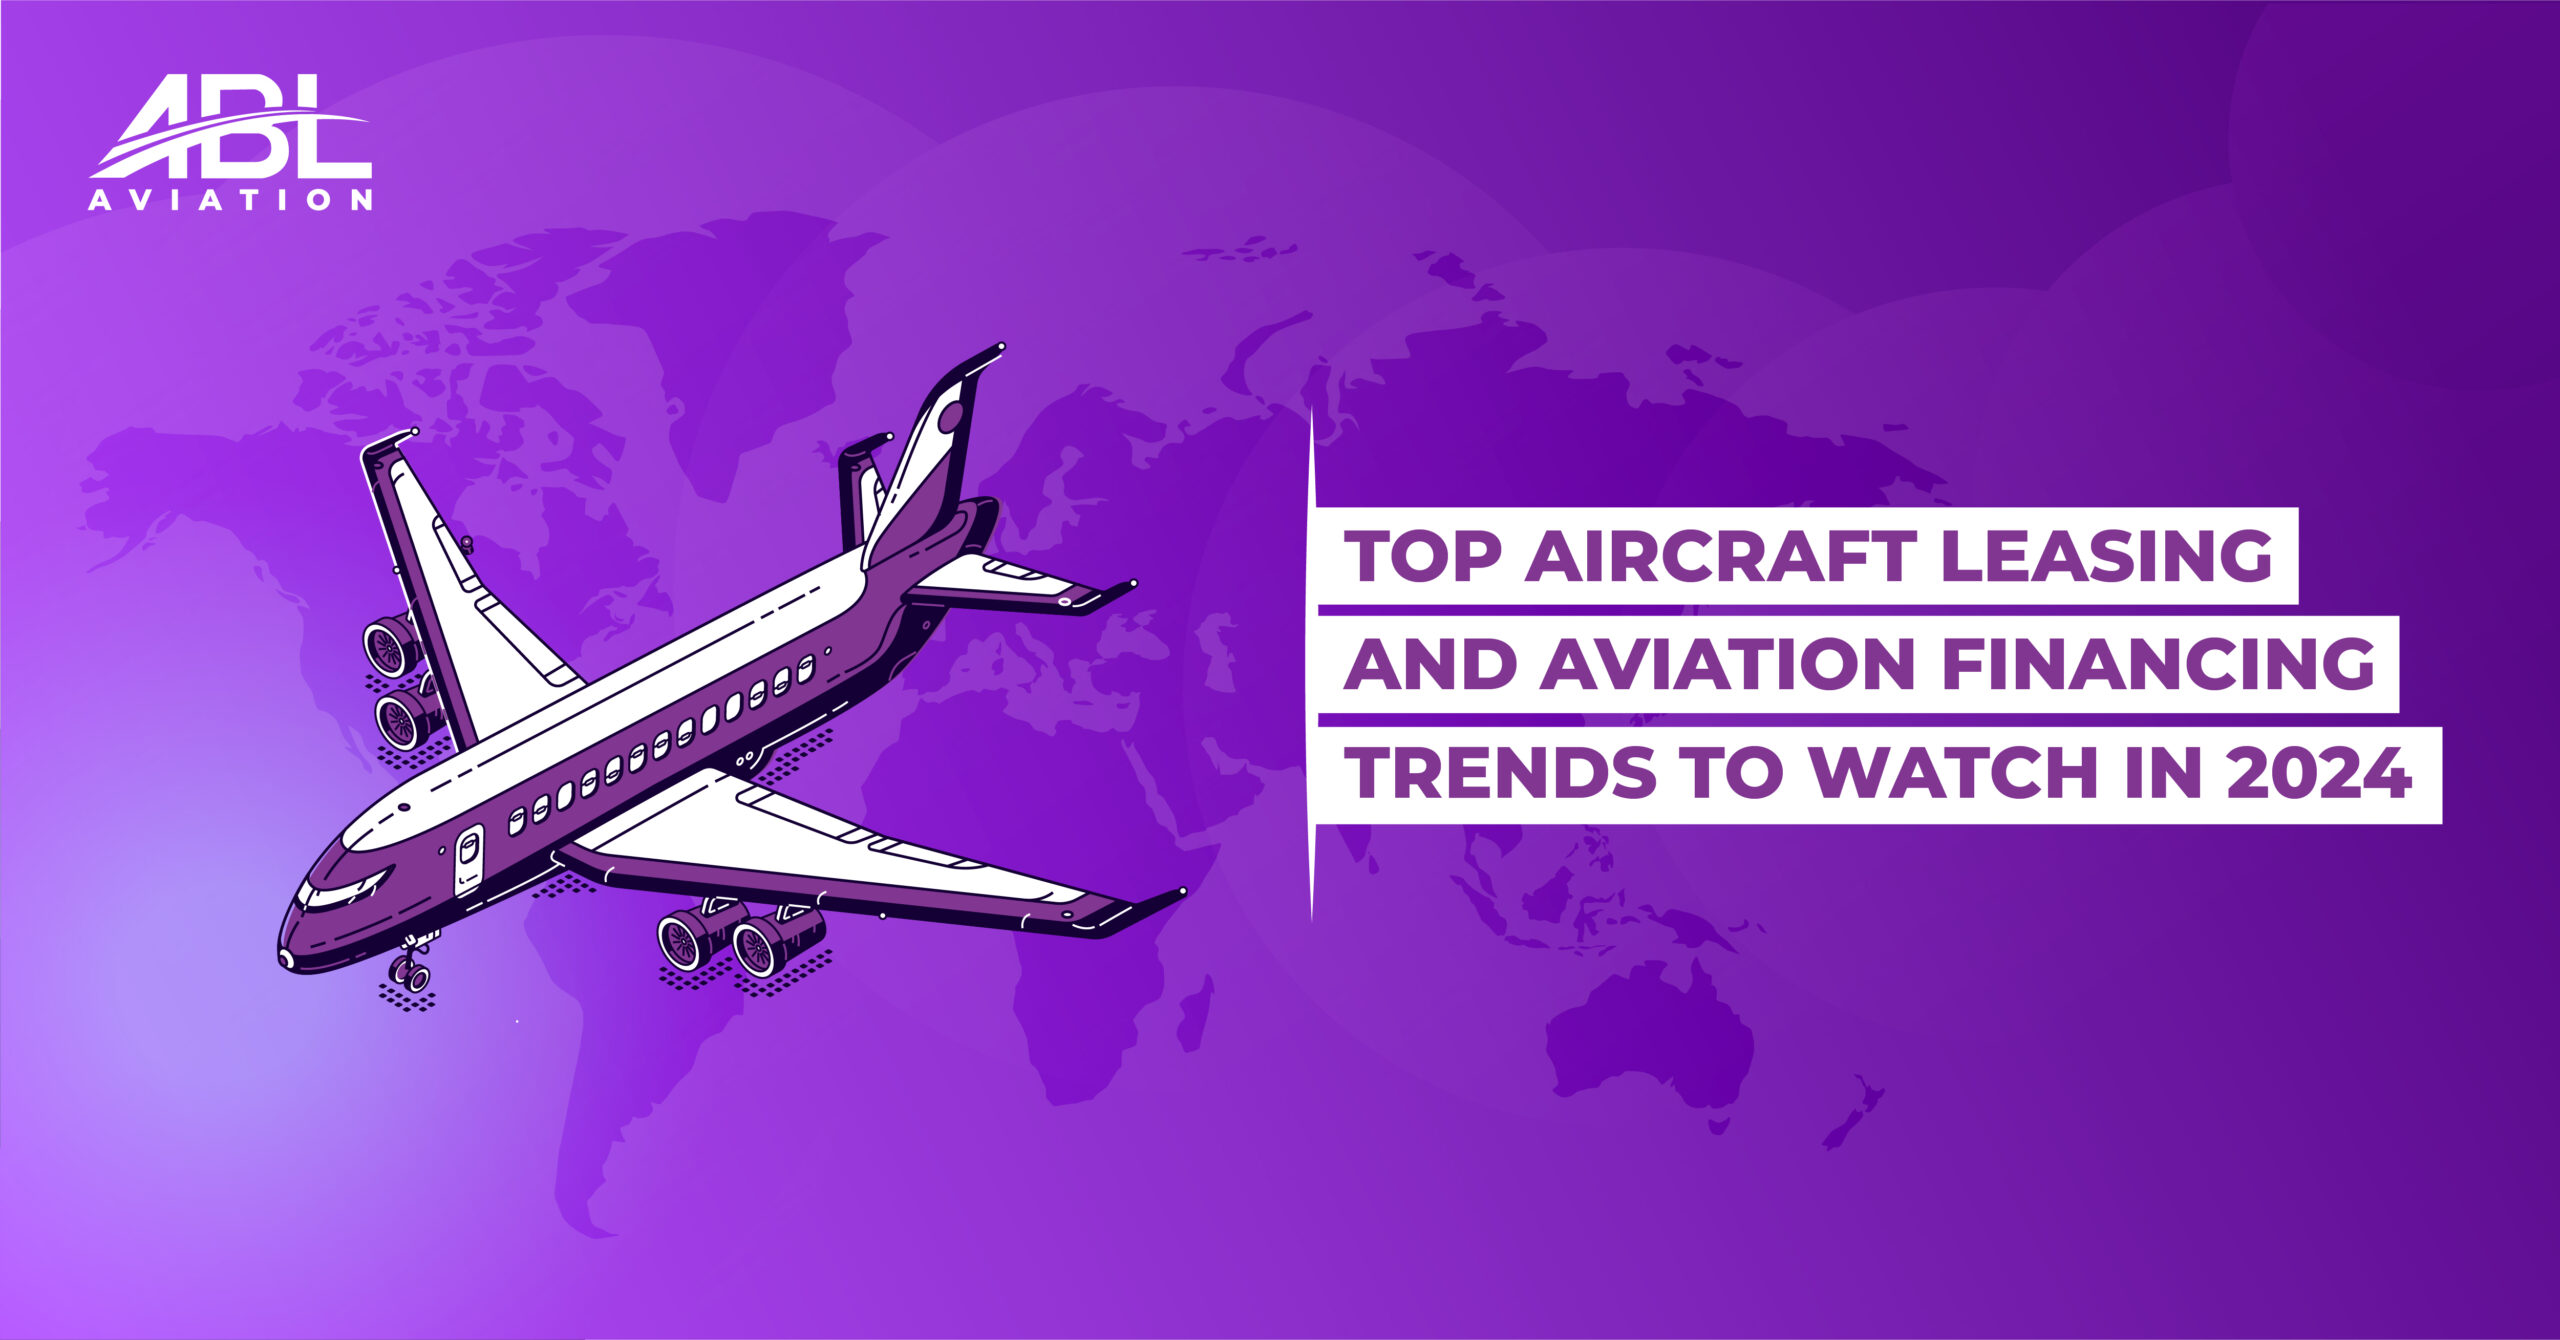 Top Aircraft Leasing and Aviation Financing Trends to Watch in 2024